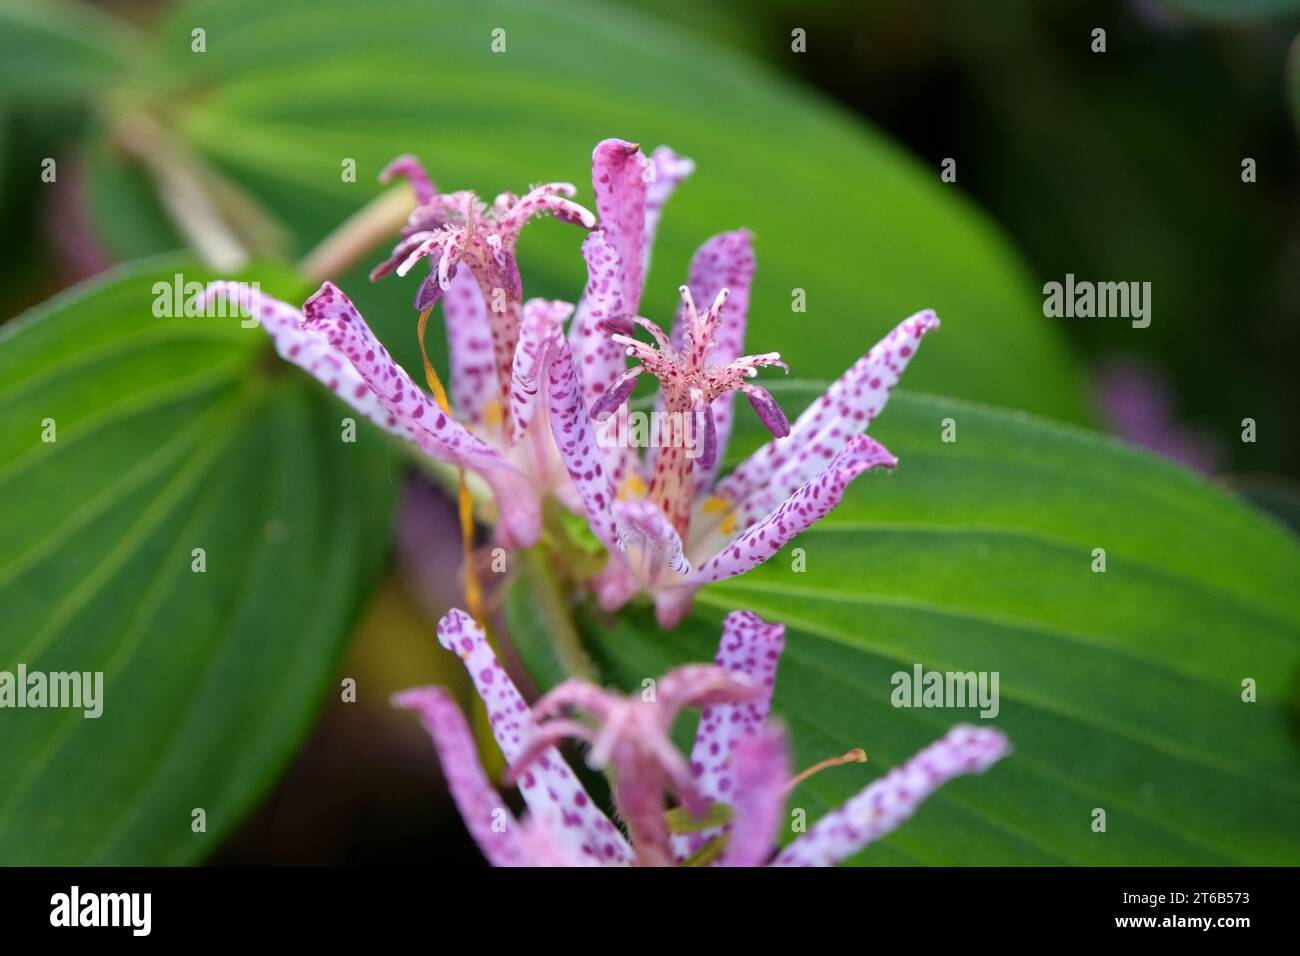 Purple and white speckled Tricyrtis hirta, the Japanese toad lily or hairy toad lily in flower. Stock Photo